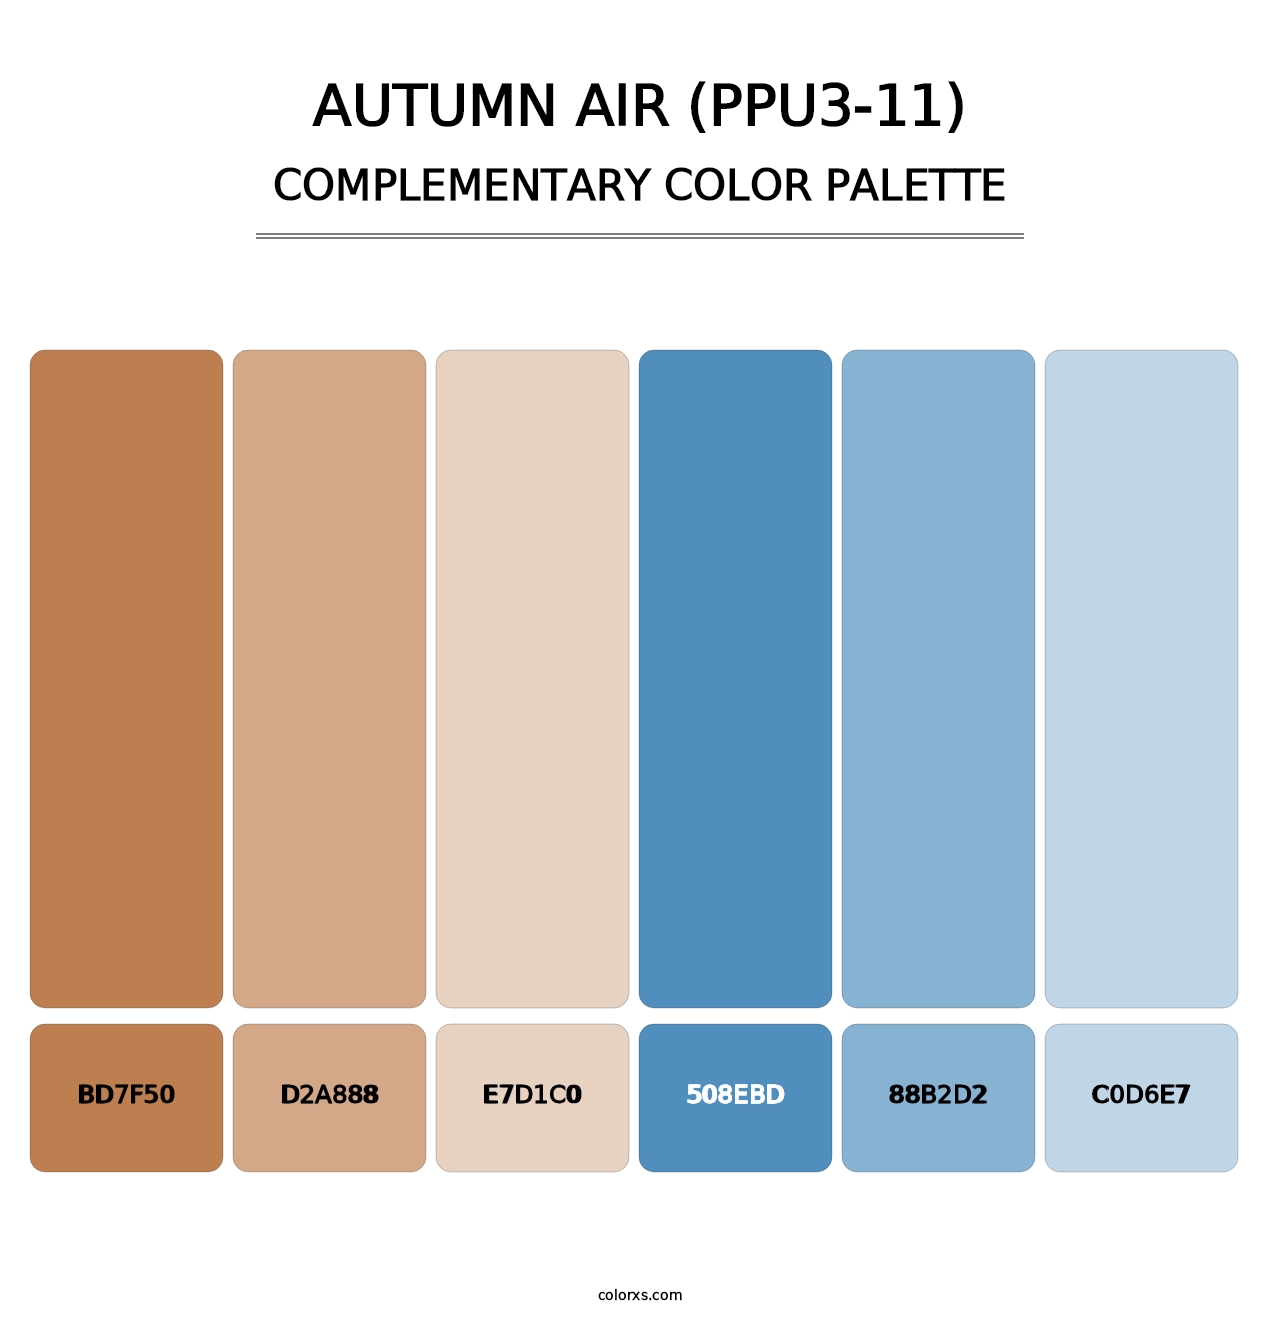 Autumn Air (PPU3-11) - Complementary Color Palette